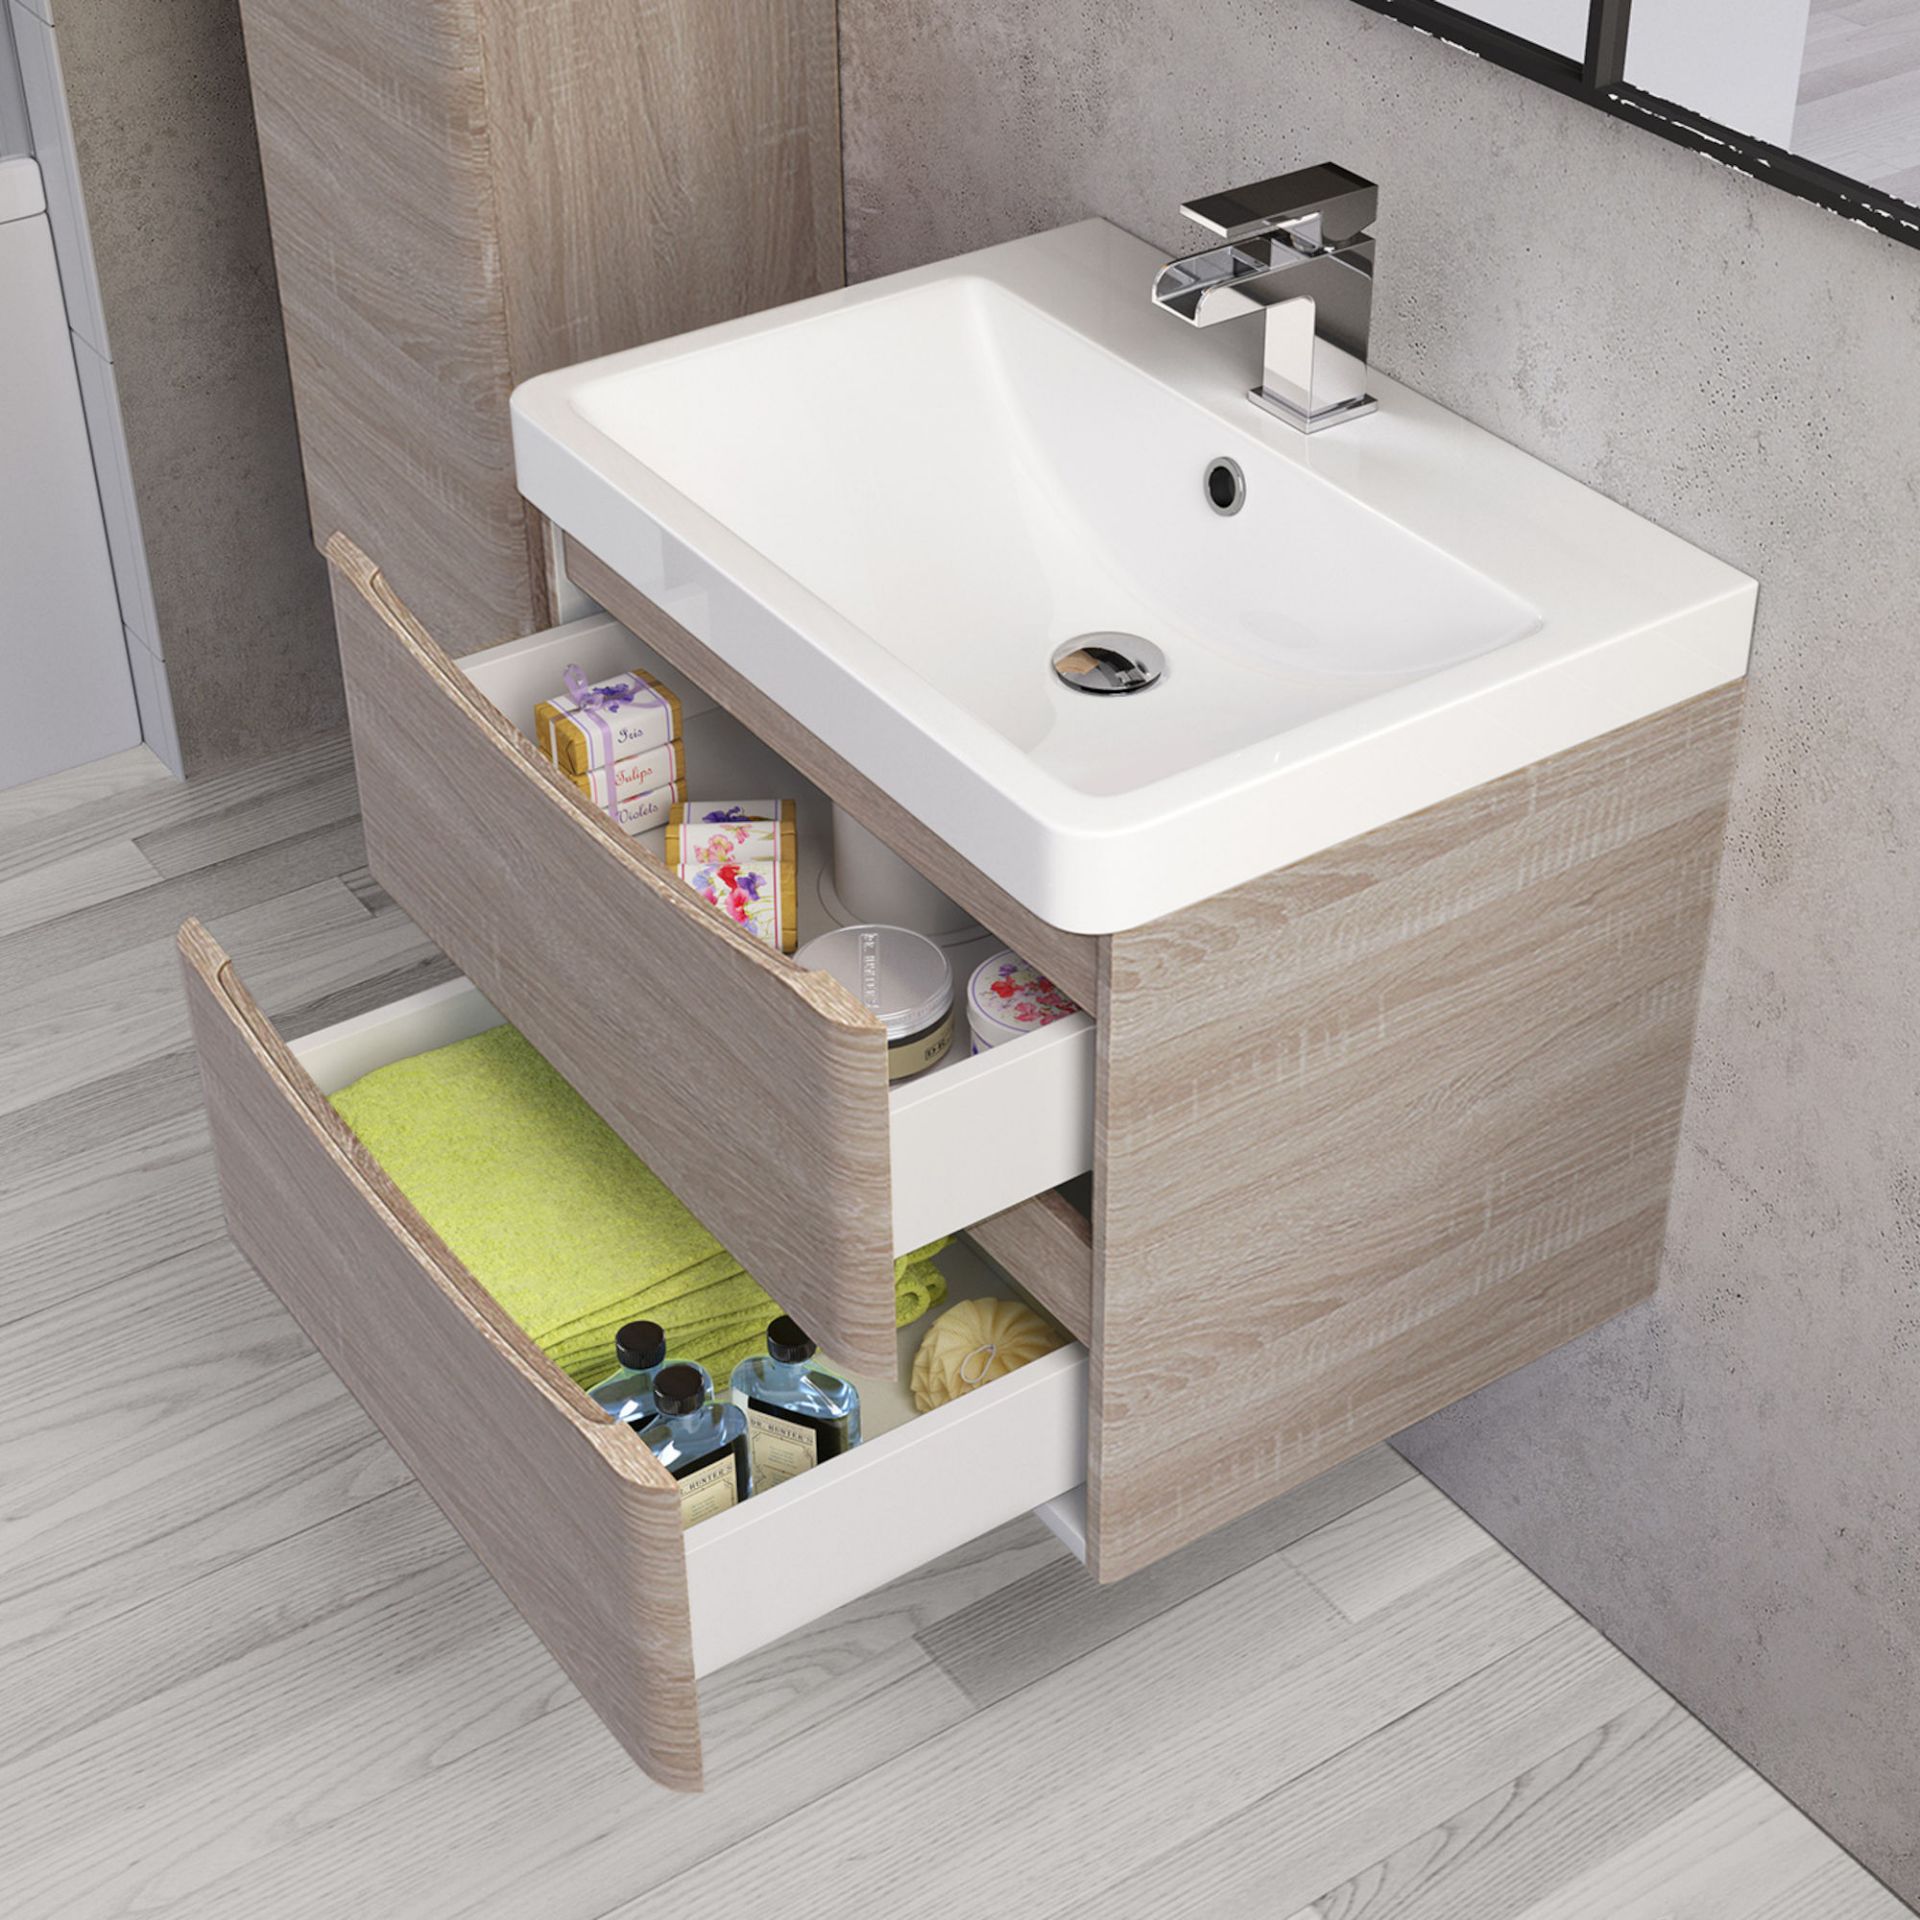 (OS68) 600mm Austin II Light Oak Effect Built In Basin Drawer Unit - Wall Hung. RRP £499.99. Comes - Image 2 of 3